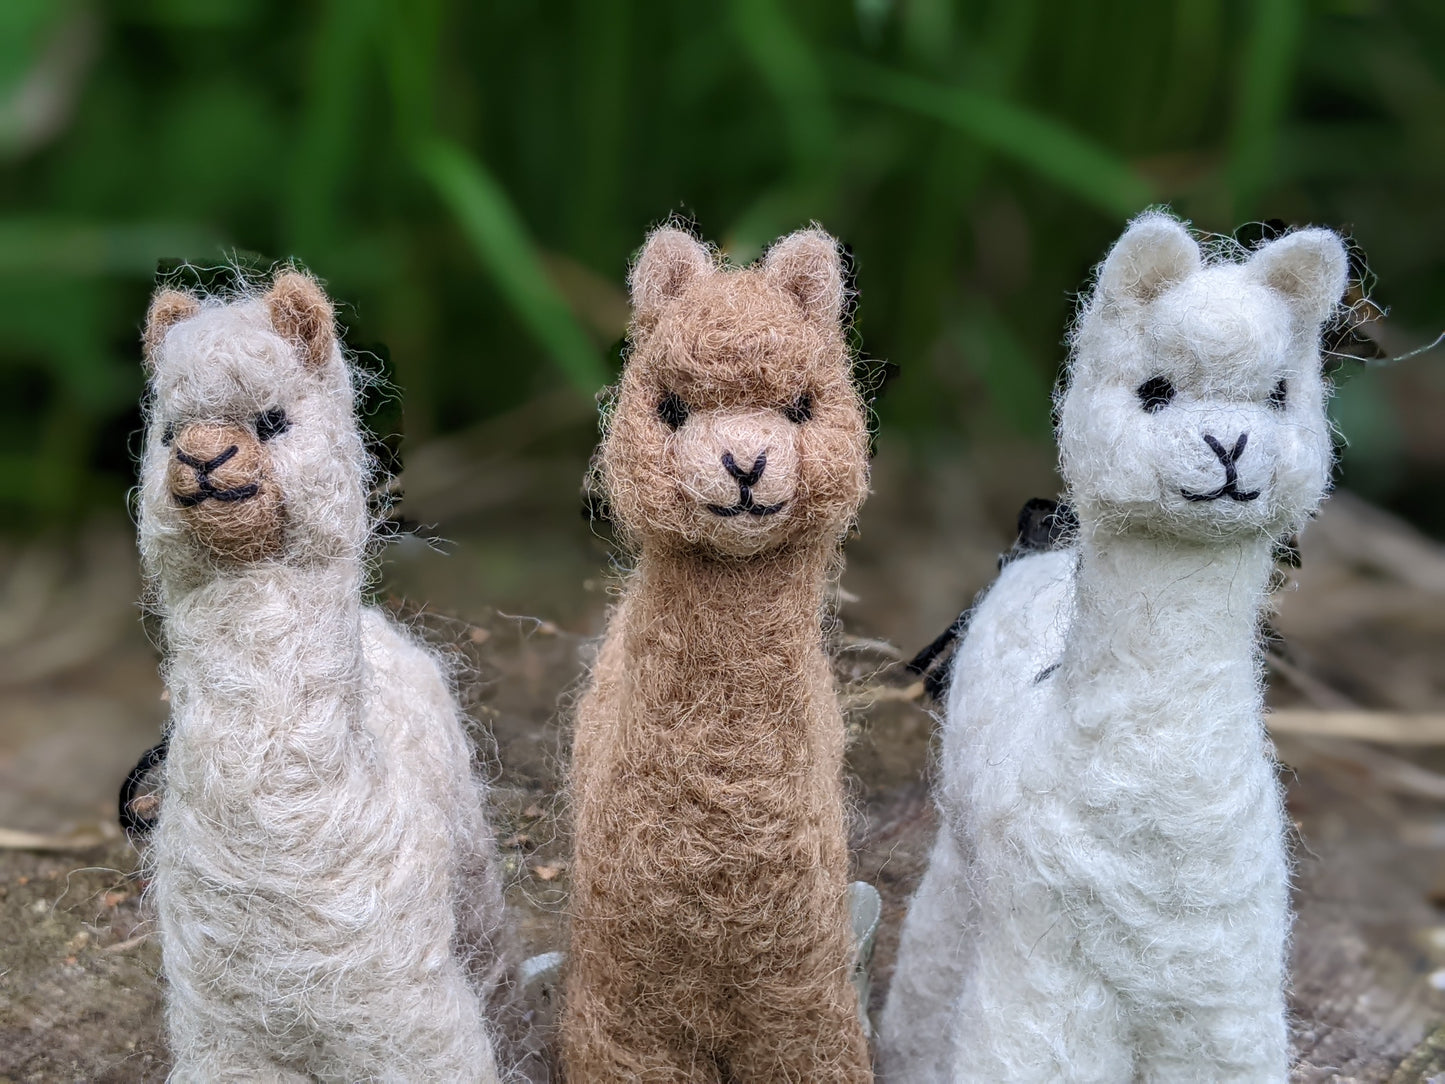 Felted Wool Alpaca Sculpture, Fair Trade Gift for Animal Lovers